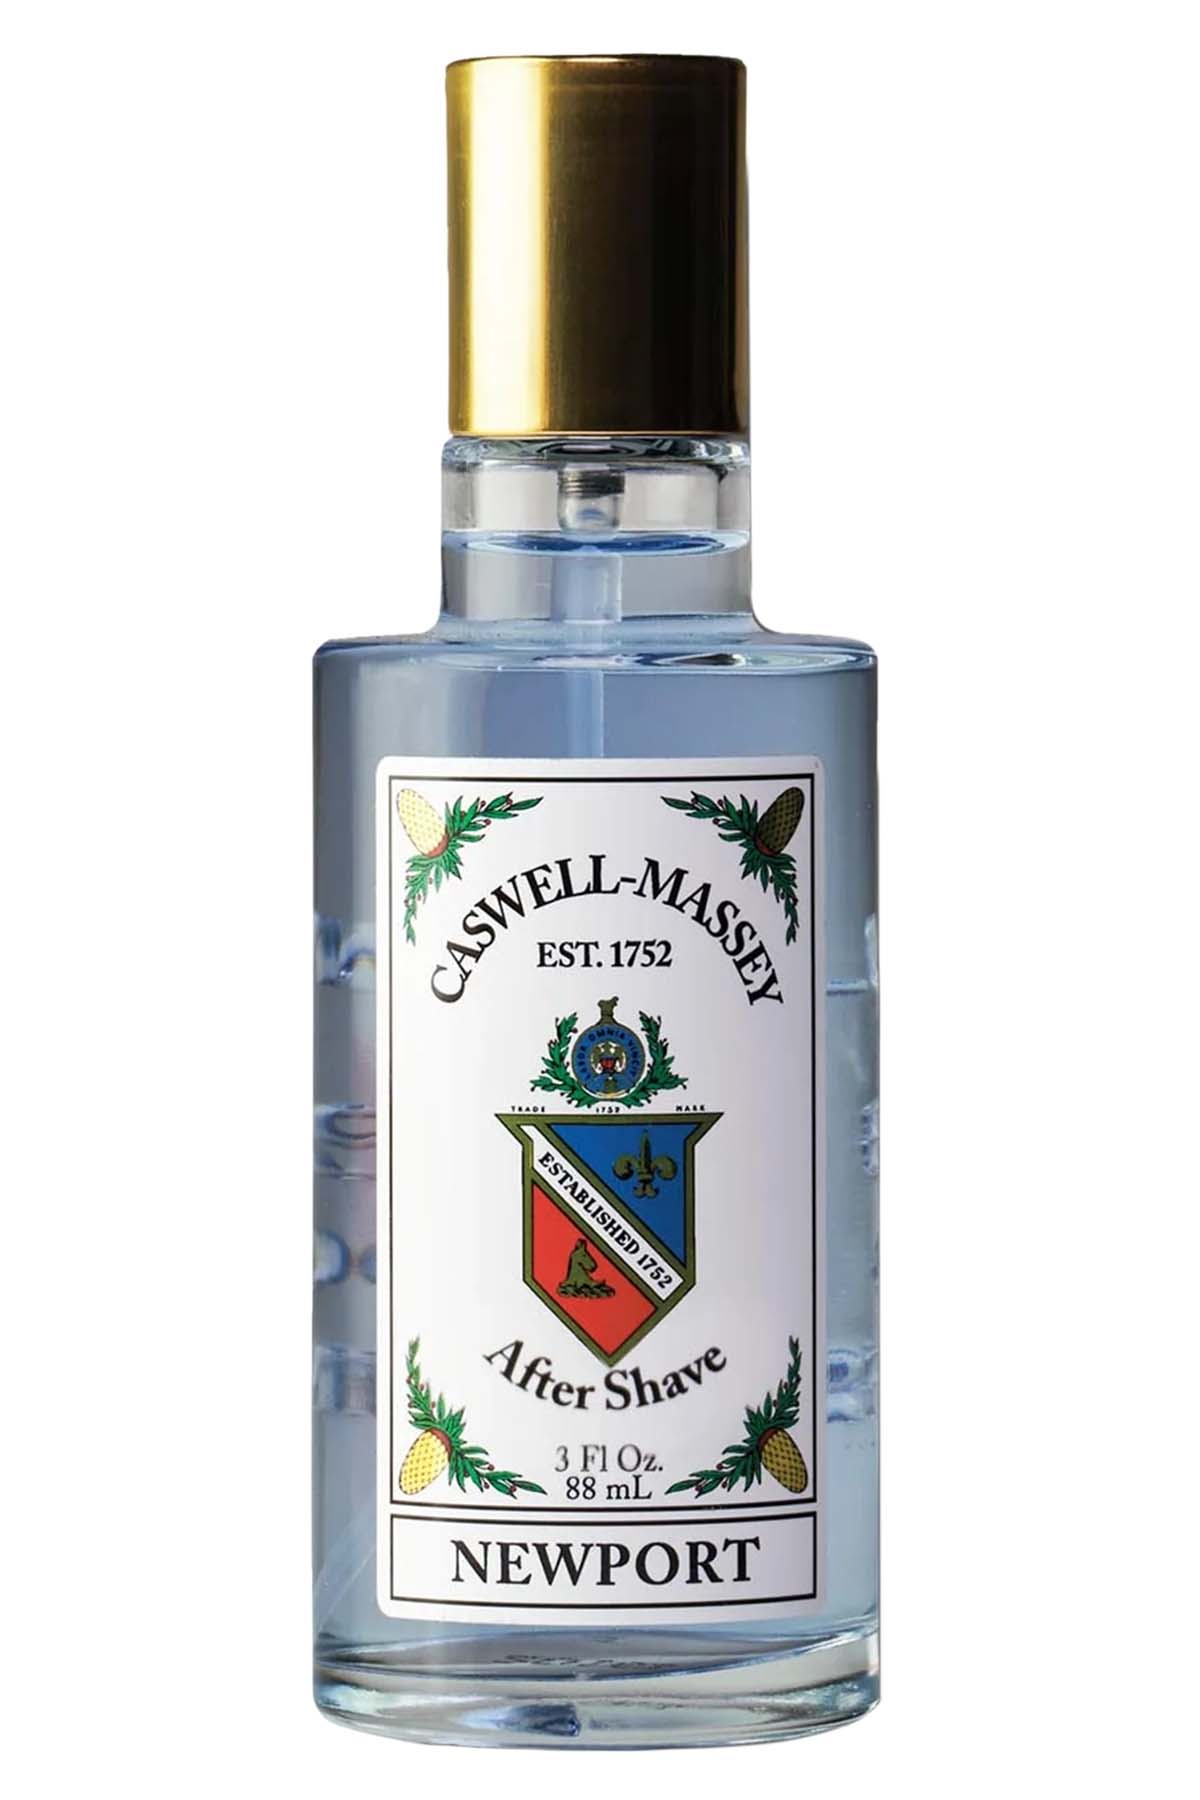 Caswell-Massey Newport After Shave